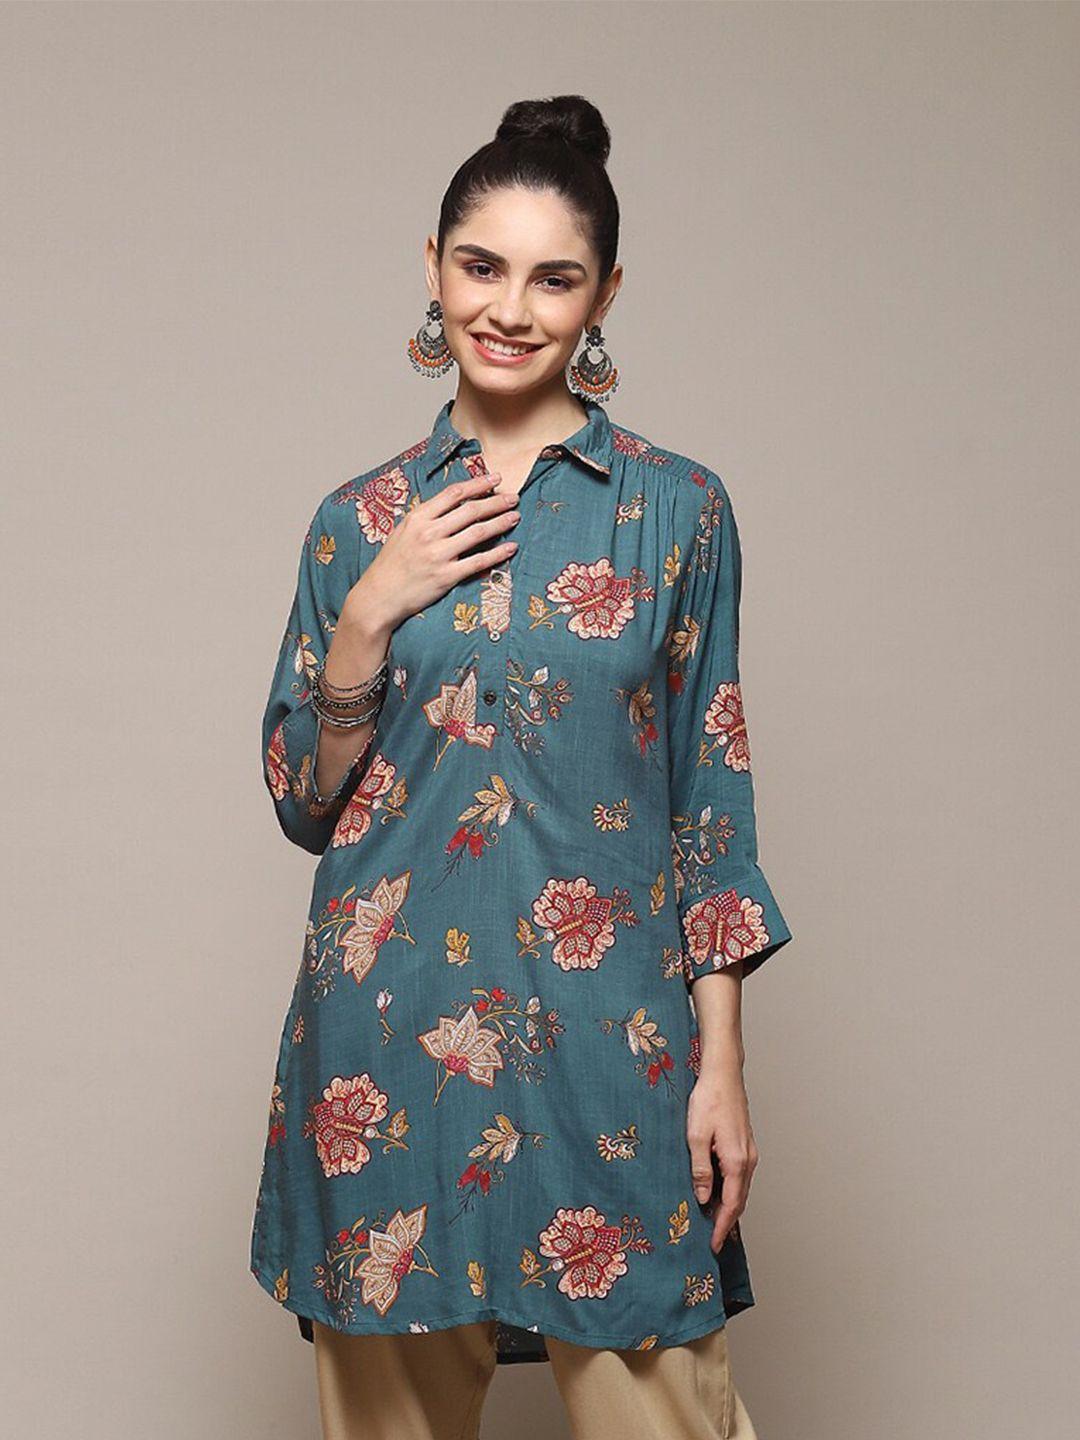 biba-teal-floral-print-roll-up-sleeves-shirt-style-longline-top